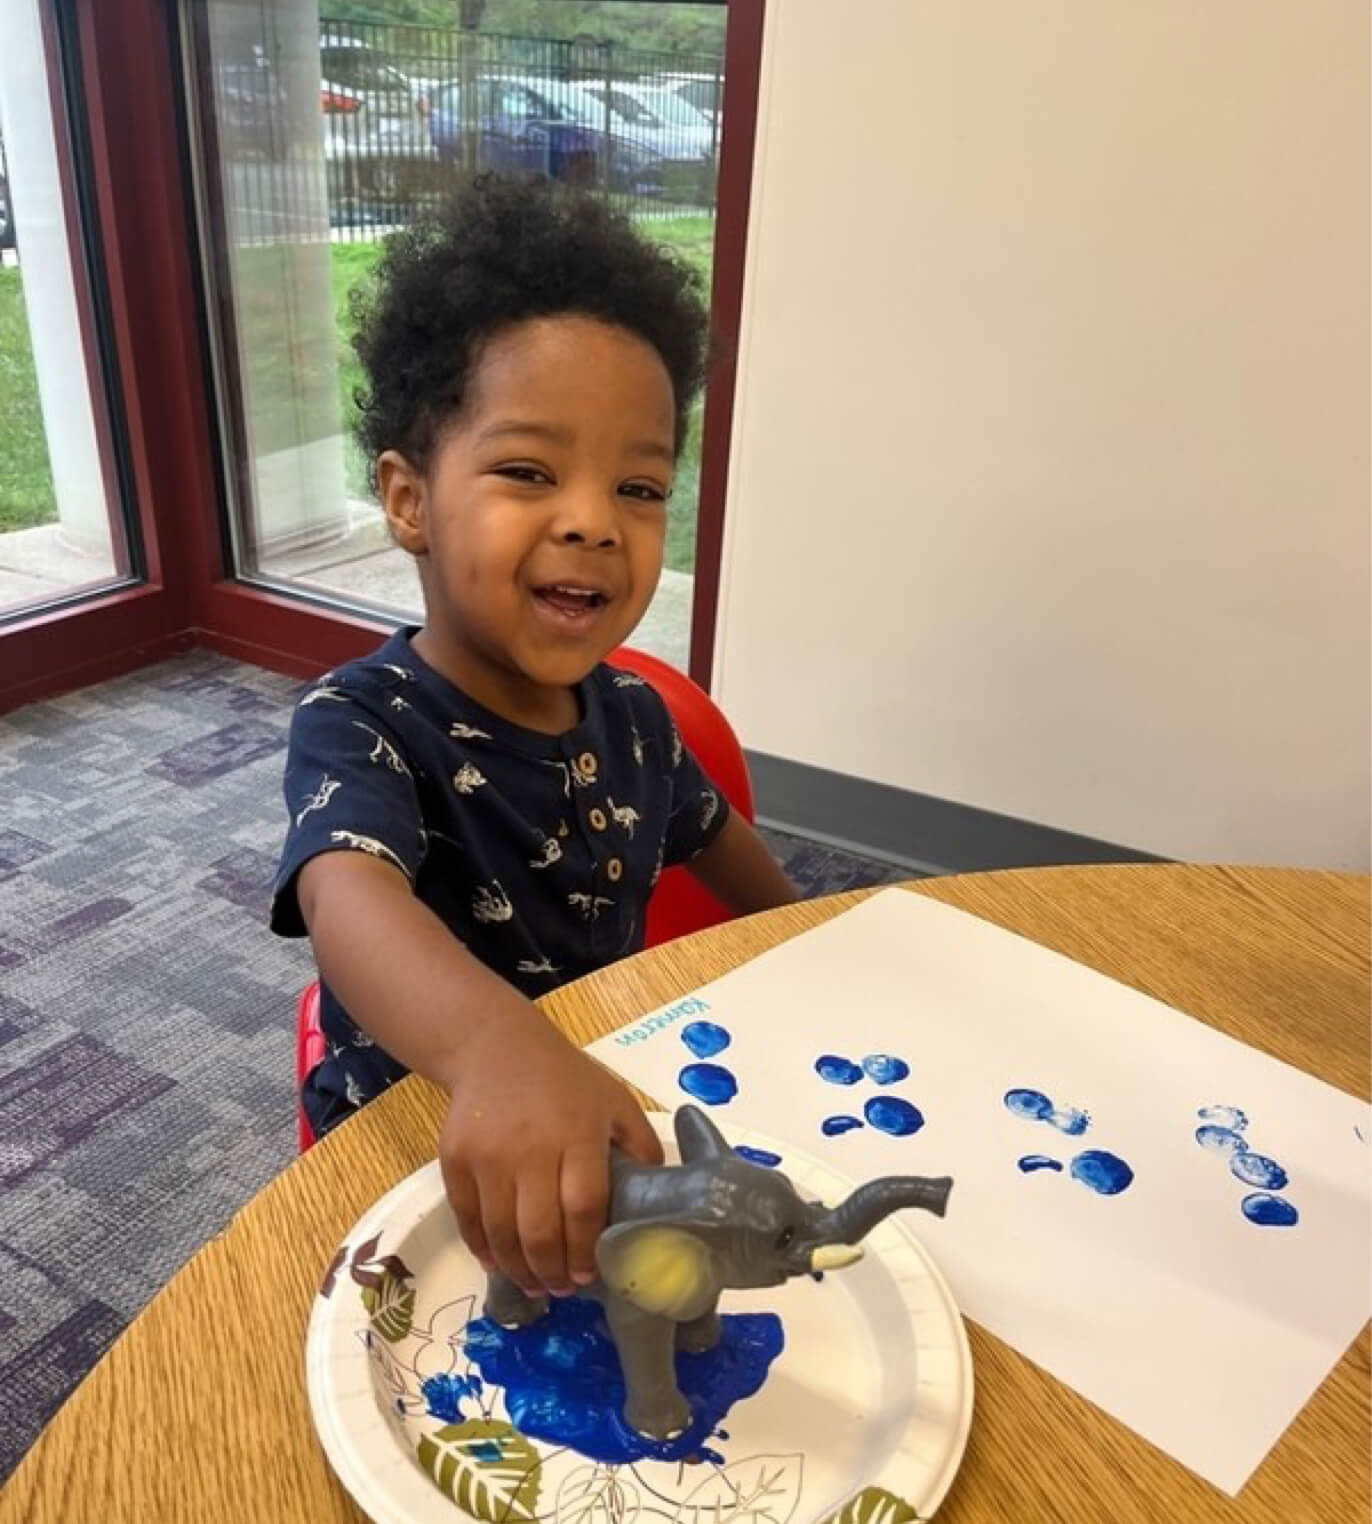 Child playing with paint and toys